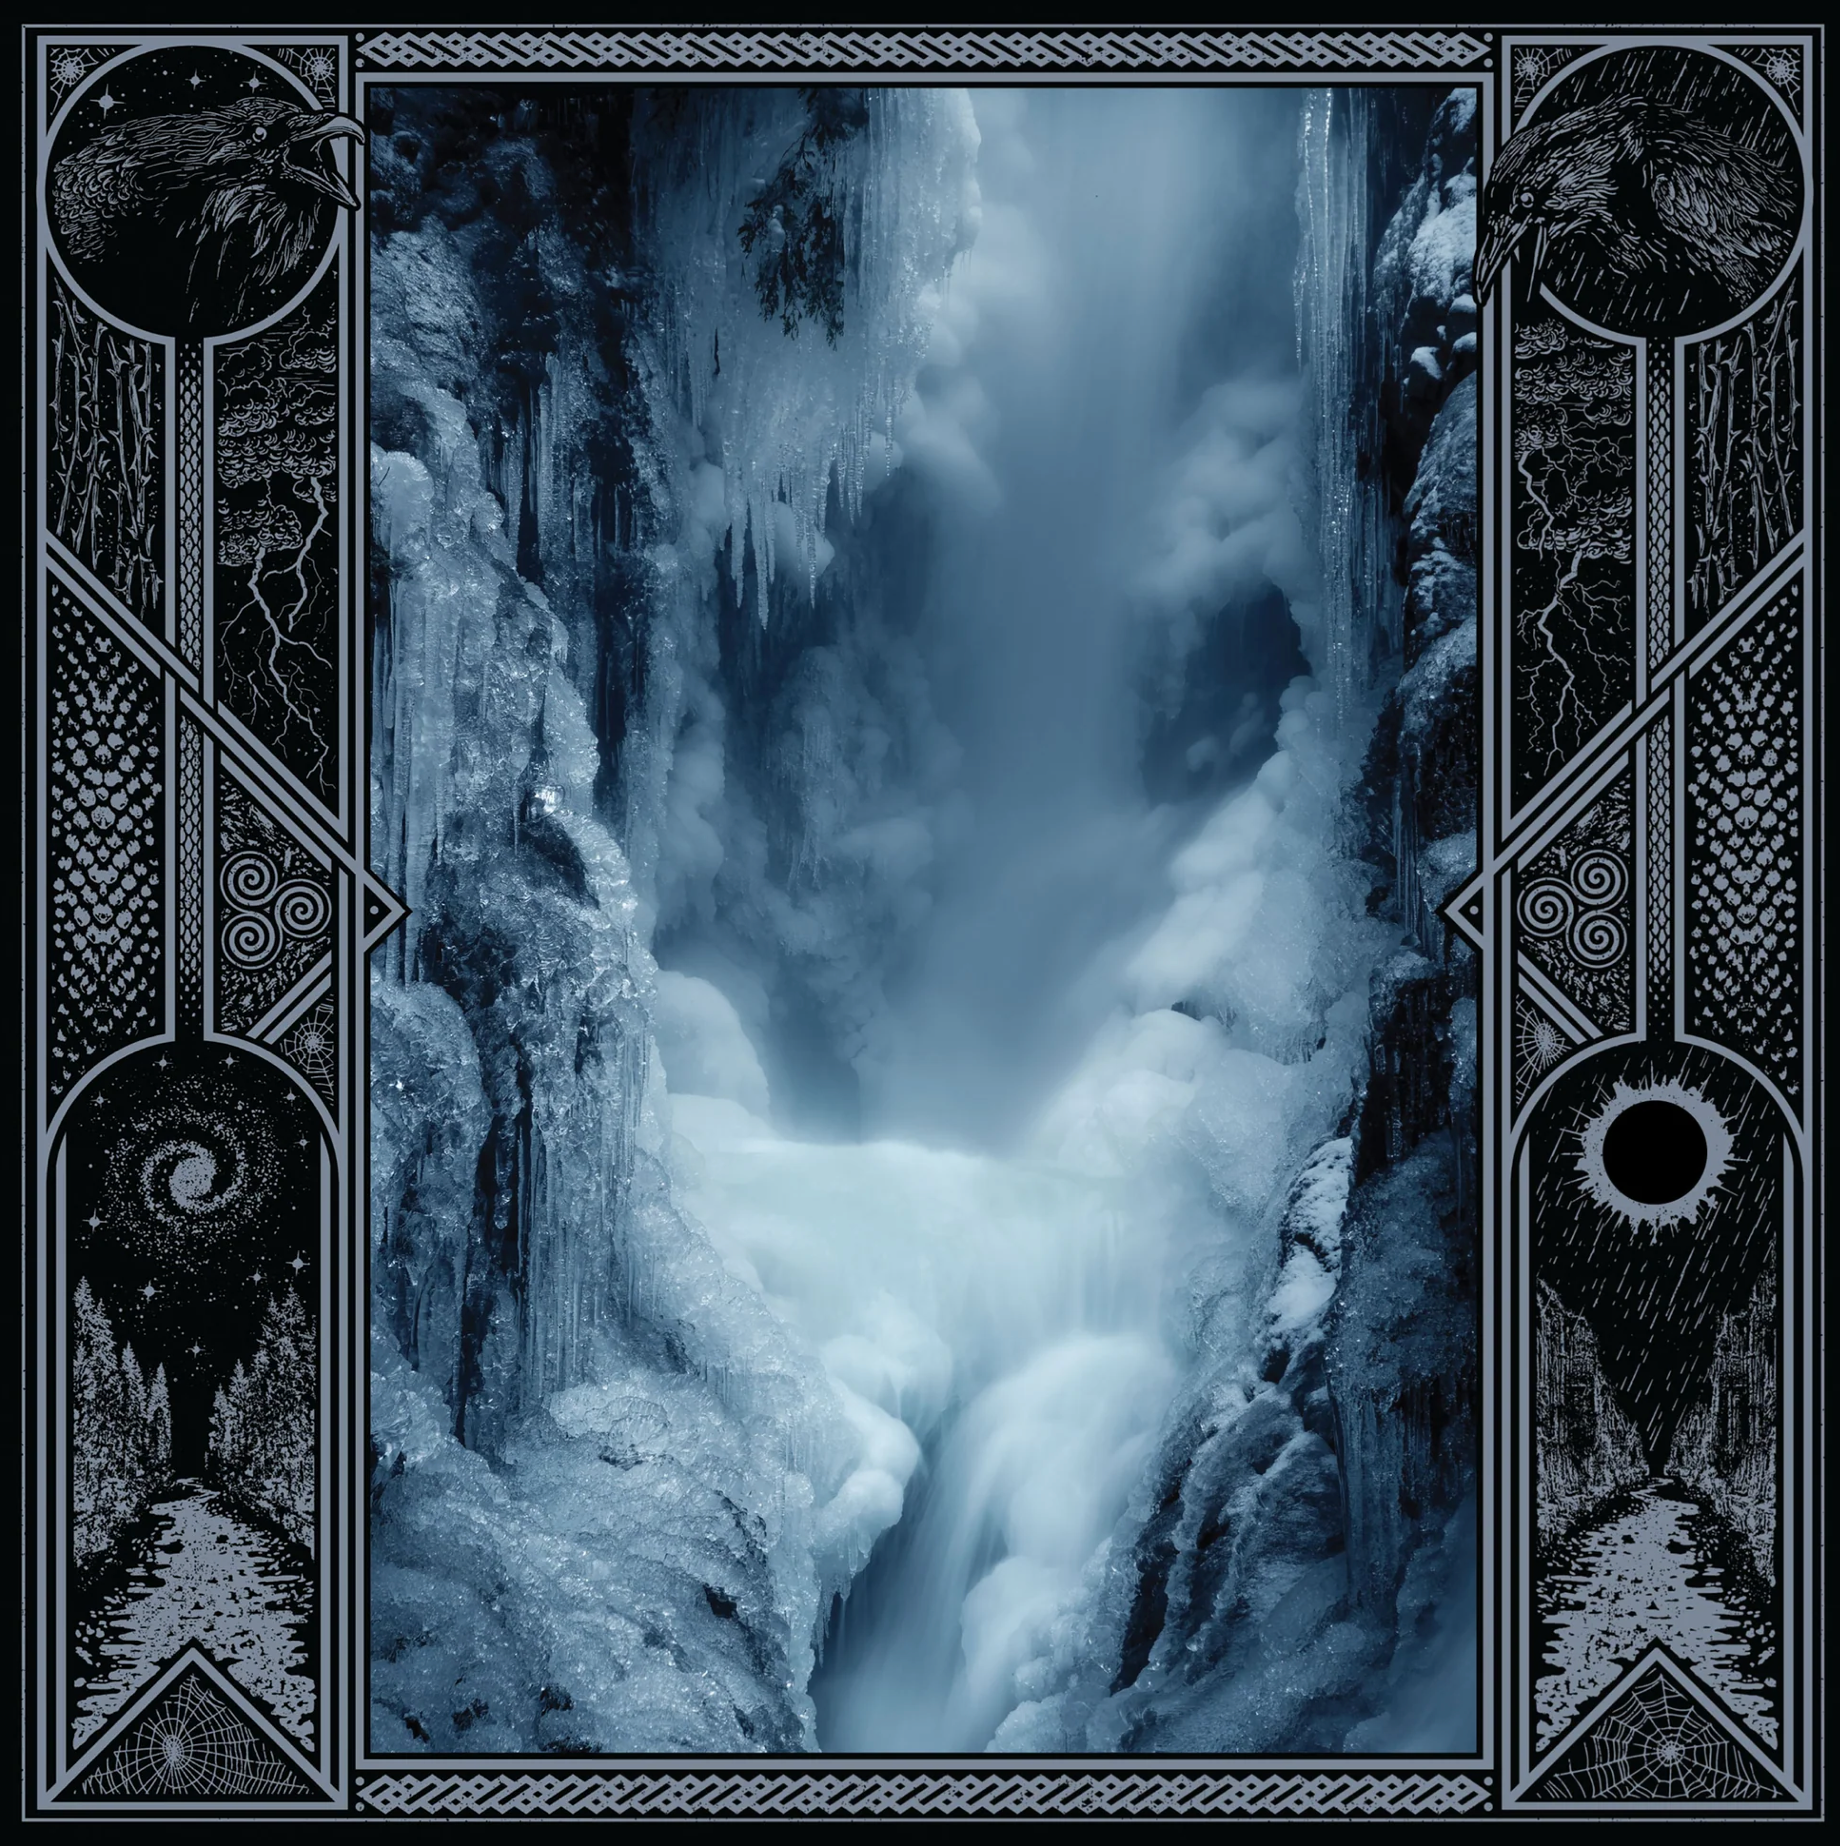 WOLVES IN THE THRONE ROOM - CRYPT OF ANCESTRAL KNOWLEDGE Vinyl 12"